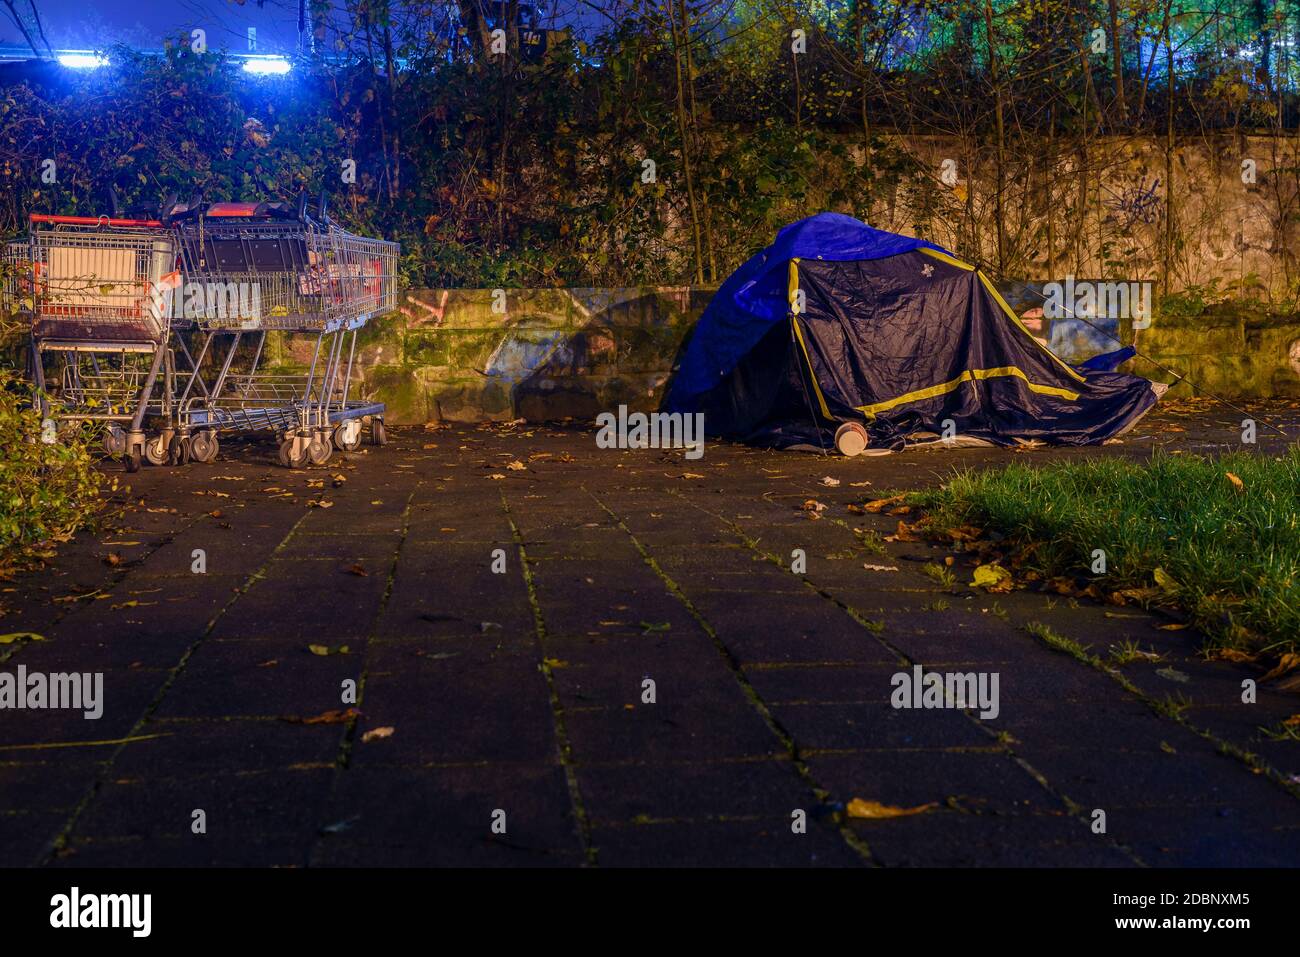 Tent of a homeless person in the city at night, shopping cart and a tent of a homeless person at night, rainy weather Stock Photo